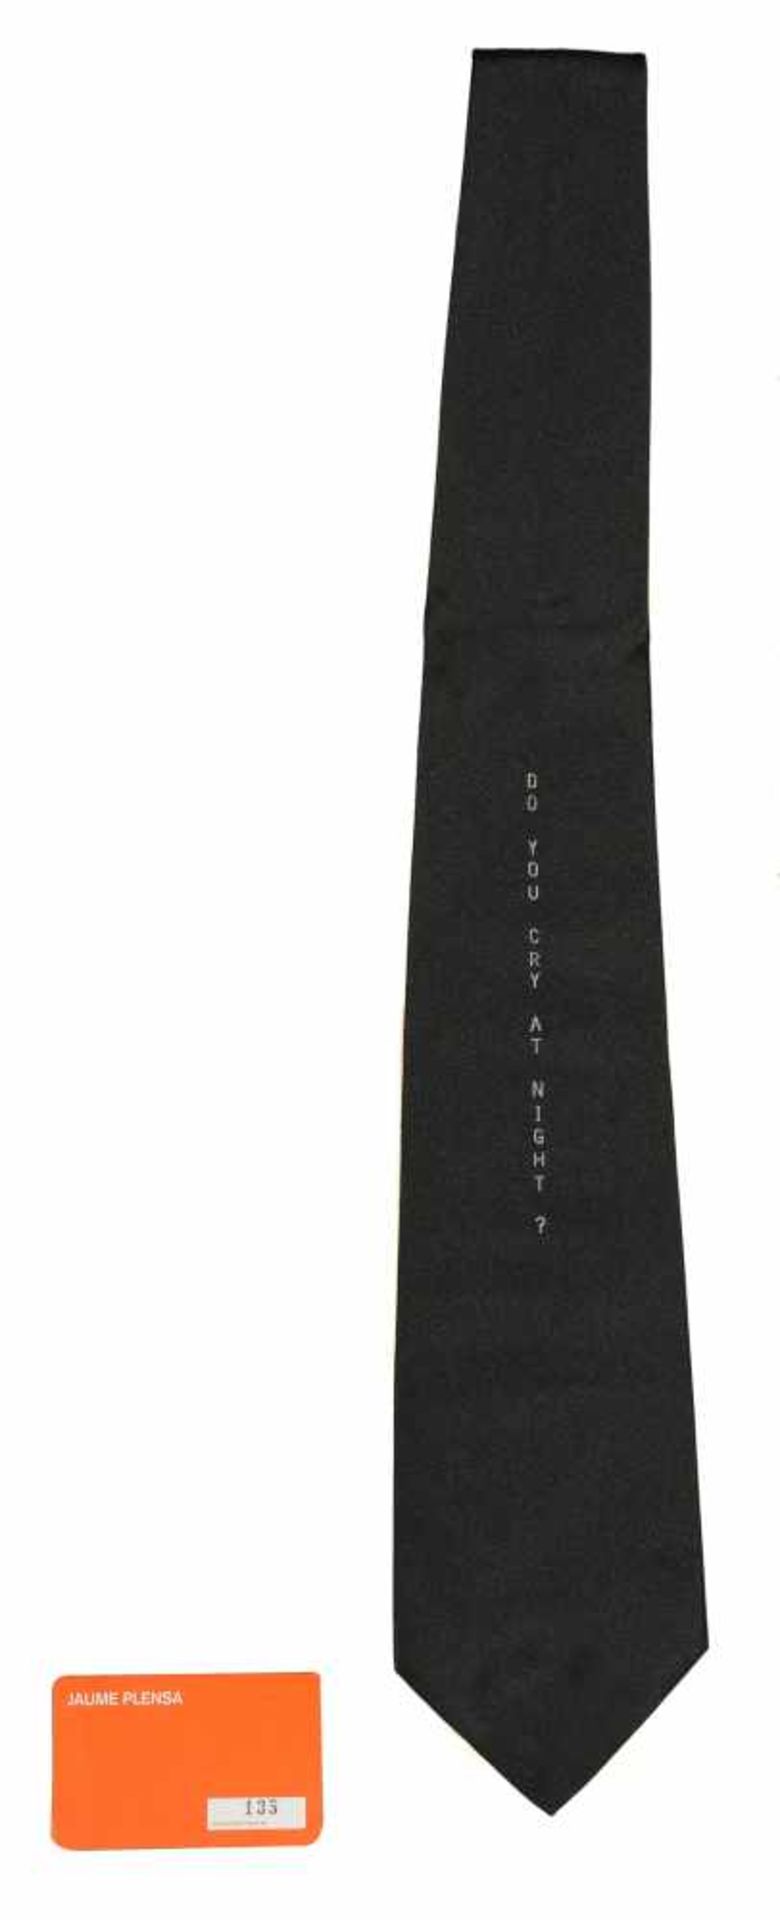 Jaume Plensa (Barcelona, 1955)"Do you cry at night"Silk tie. Copy numbered 135/300. Made at the